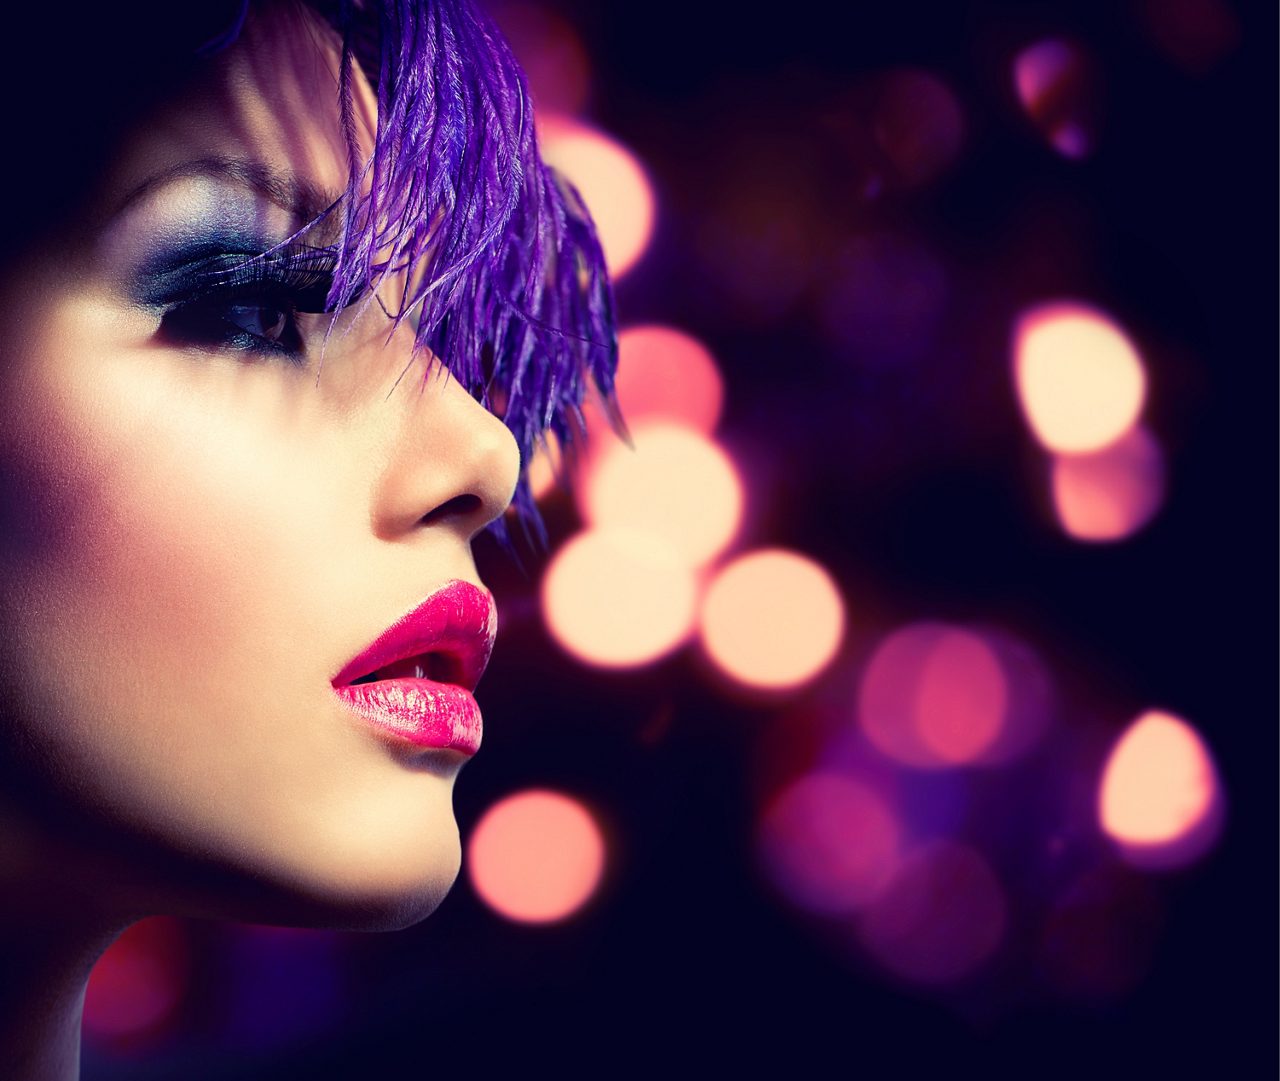 Woman with purple hair, pink lipstick, and smooth skin